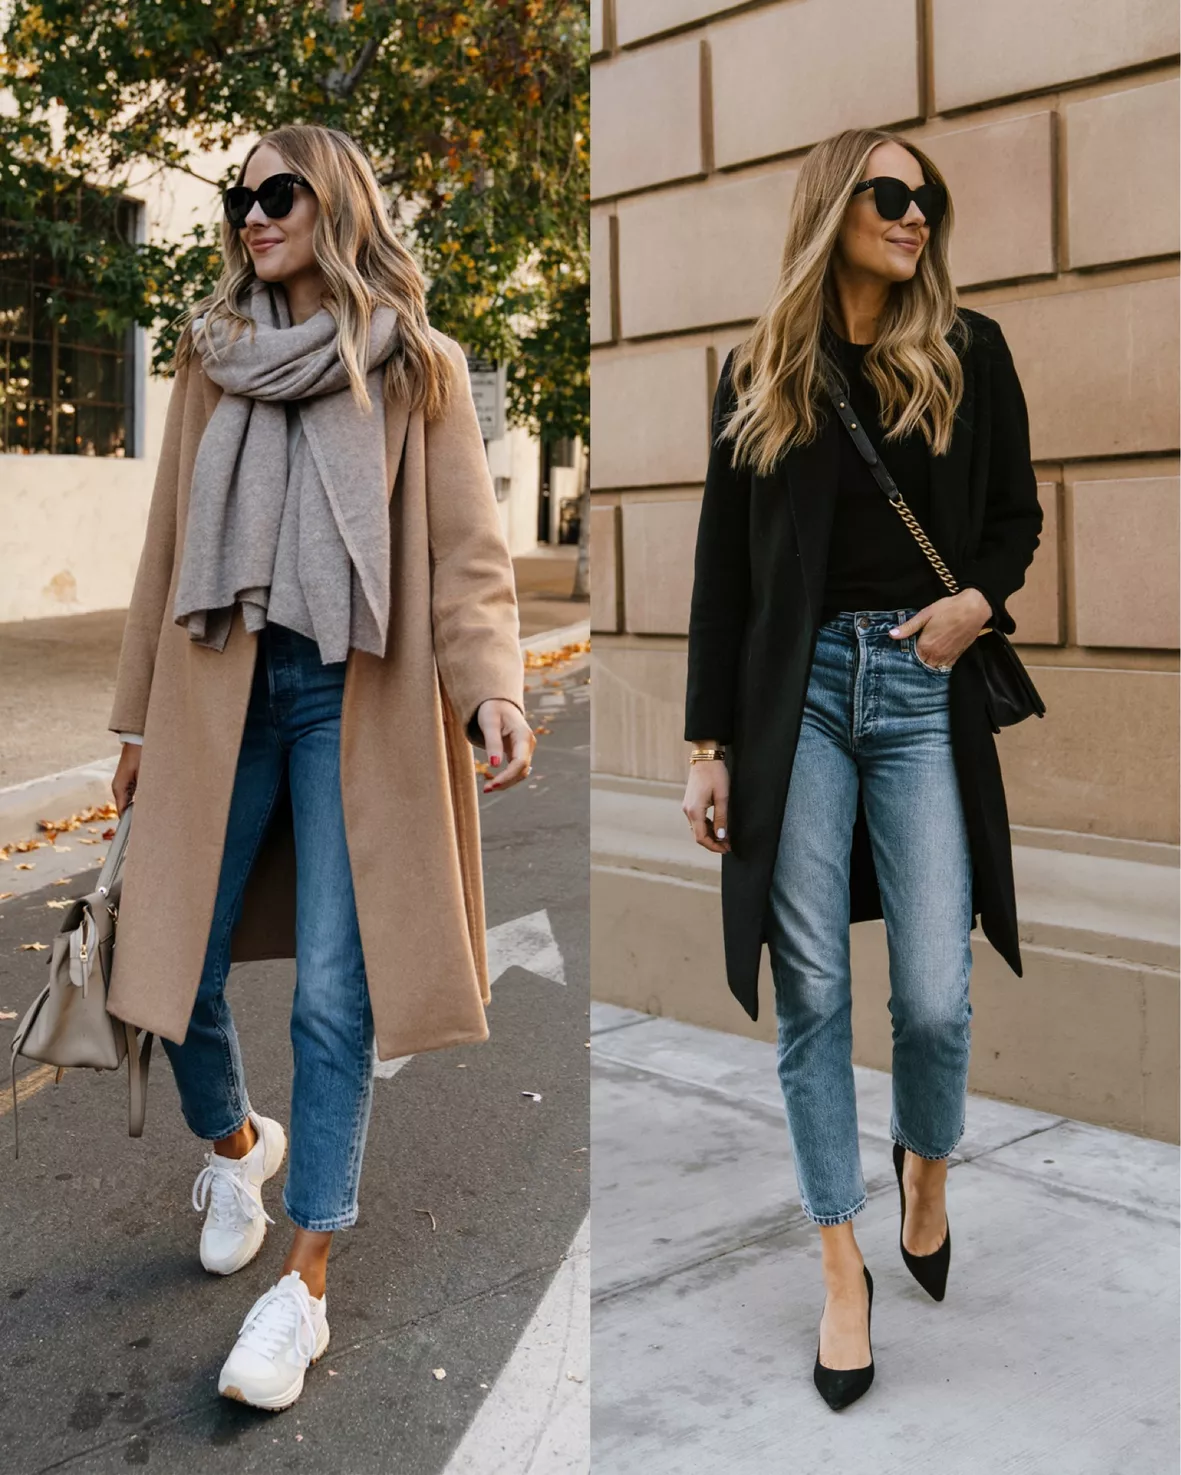 How to Style a Camel Coat for Winter - Fashion Jackson